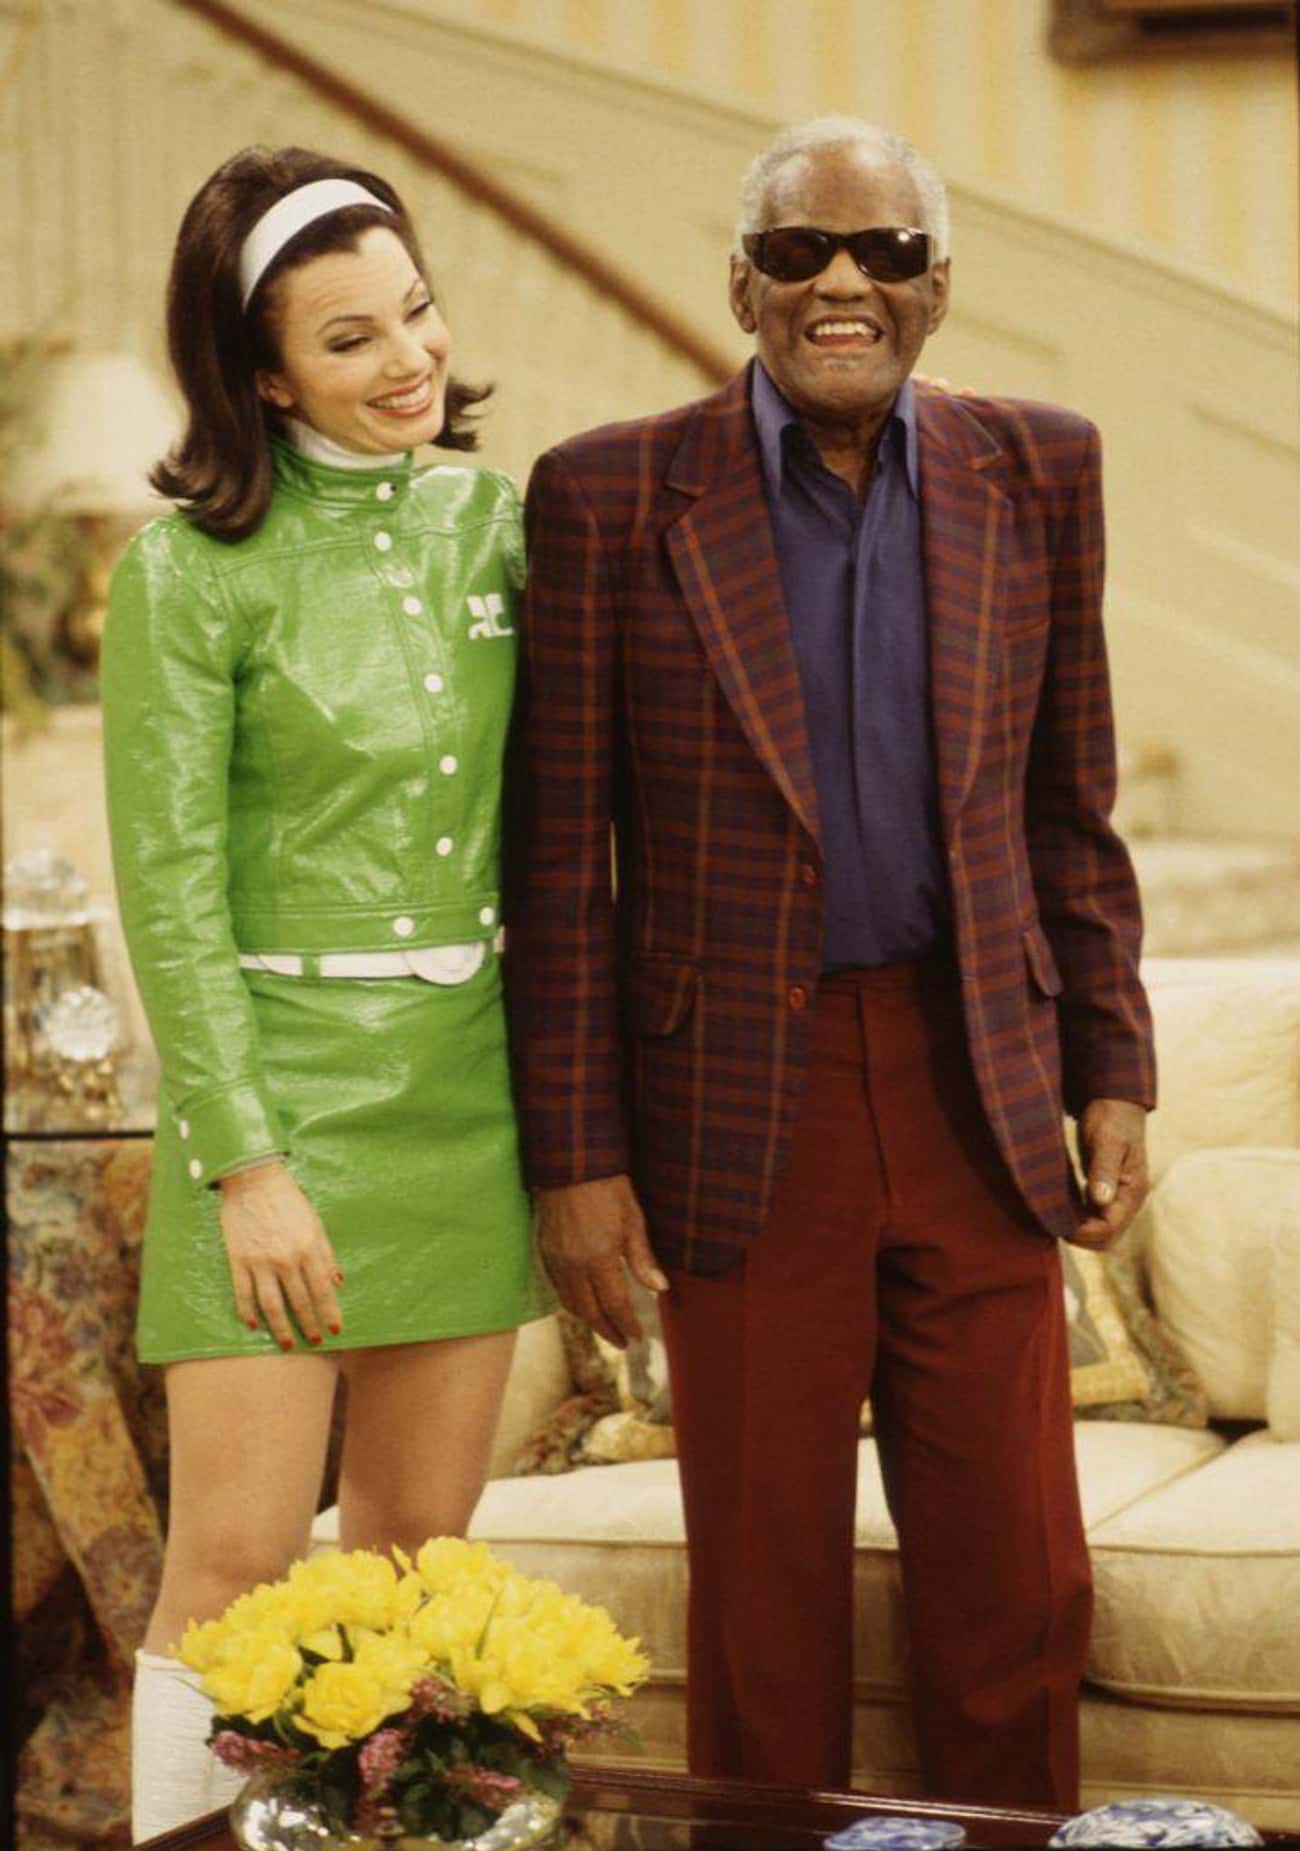 Ray Charles Appeared In Four Episodes Of 'The Nanny' As Yetta's Boyfriend Sammy